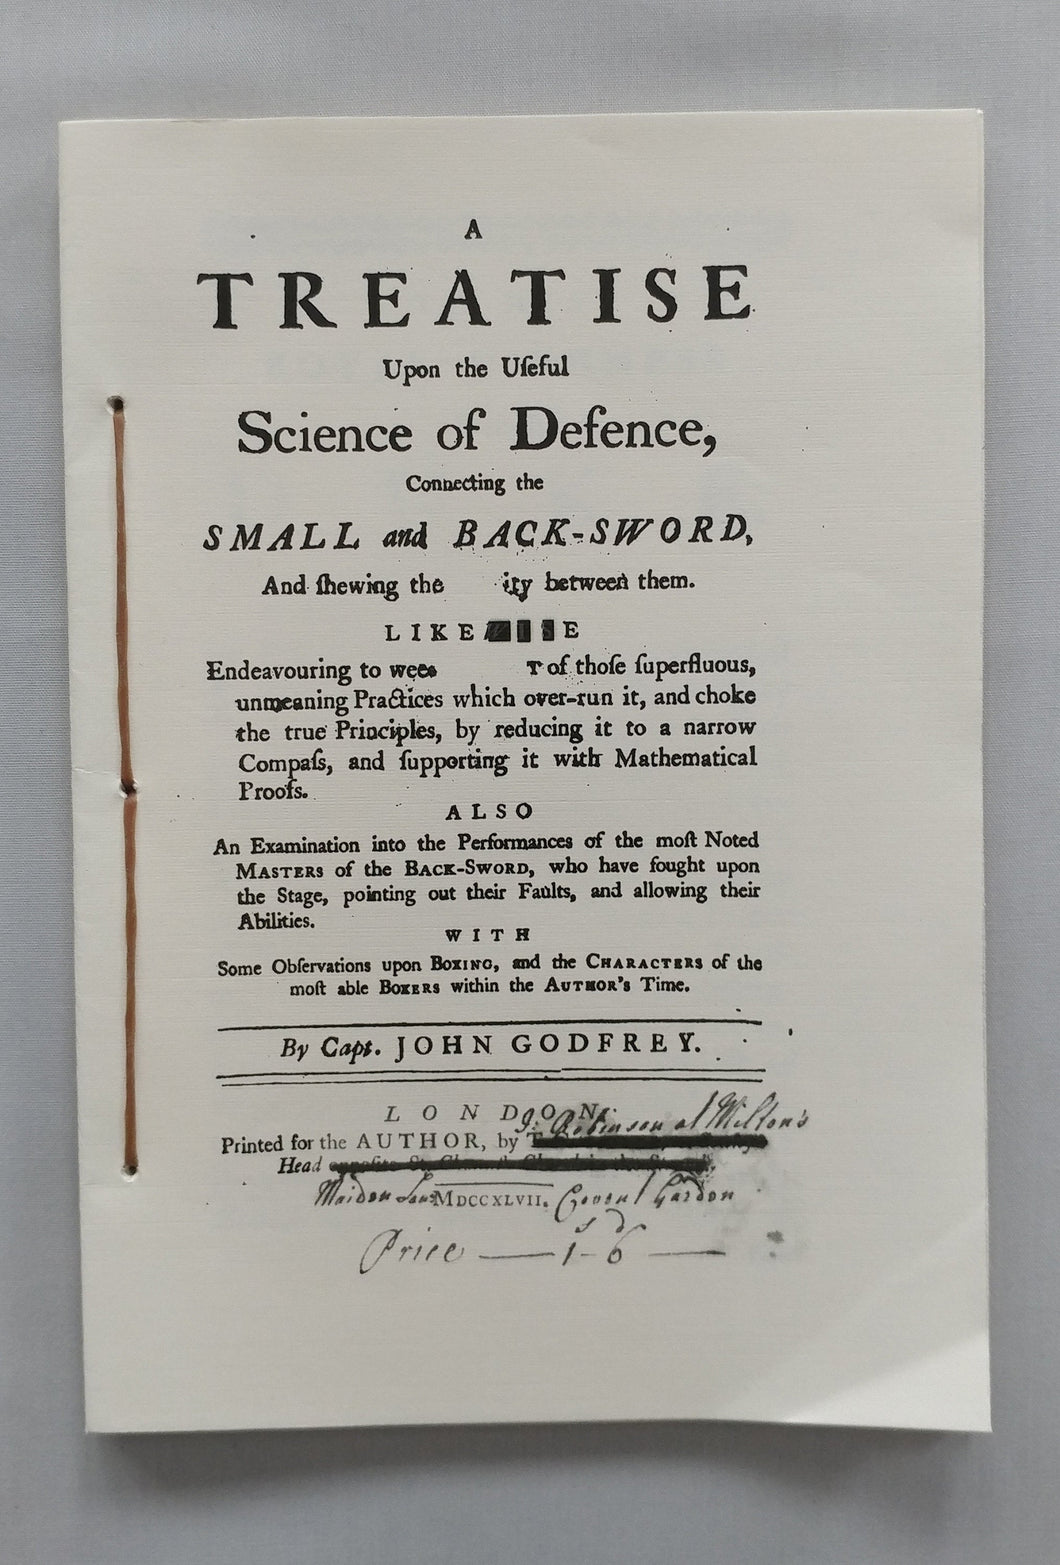 A Treatise Upon the Useful Science of Defence Containing the Small and Back-Sword